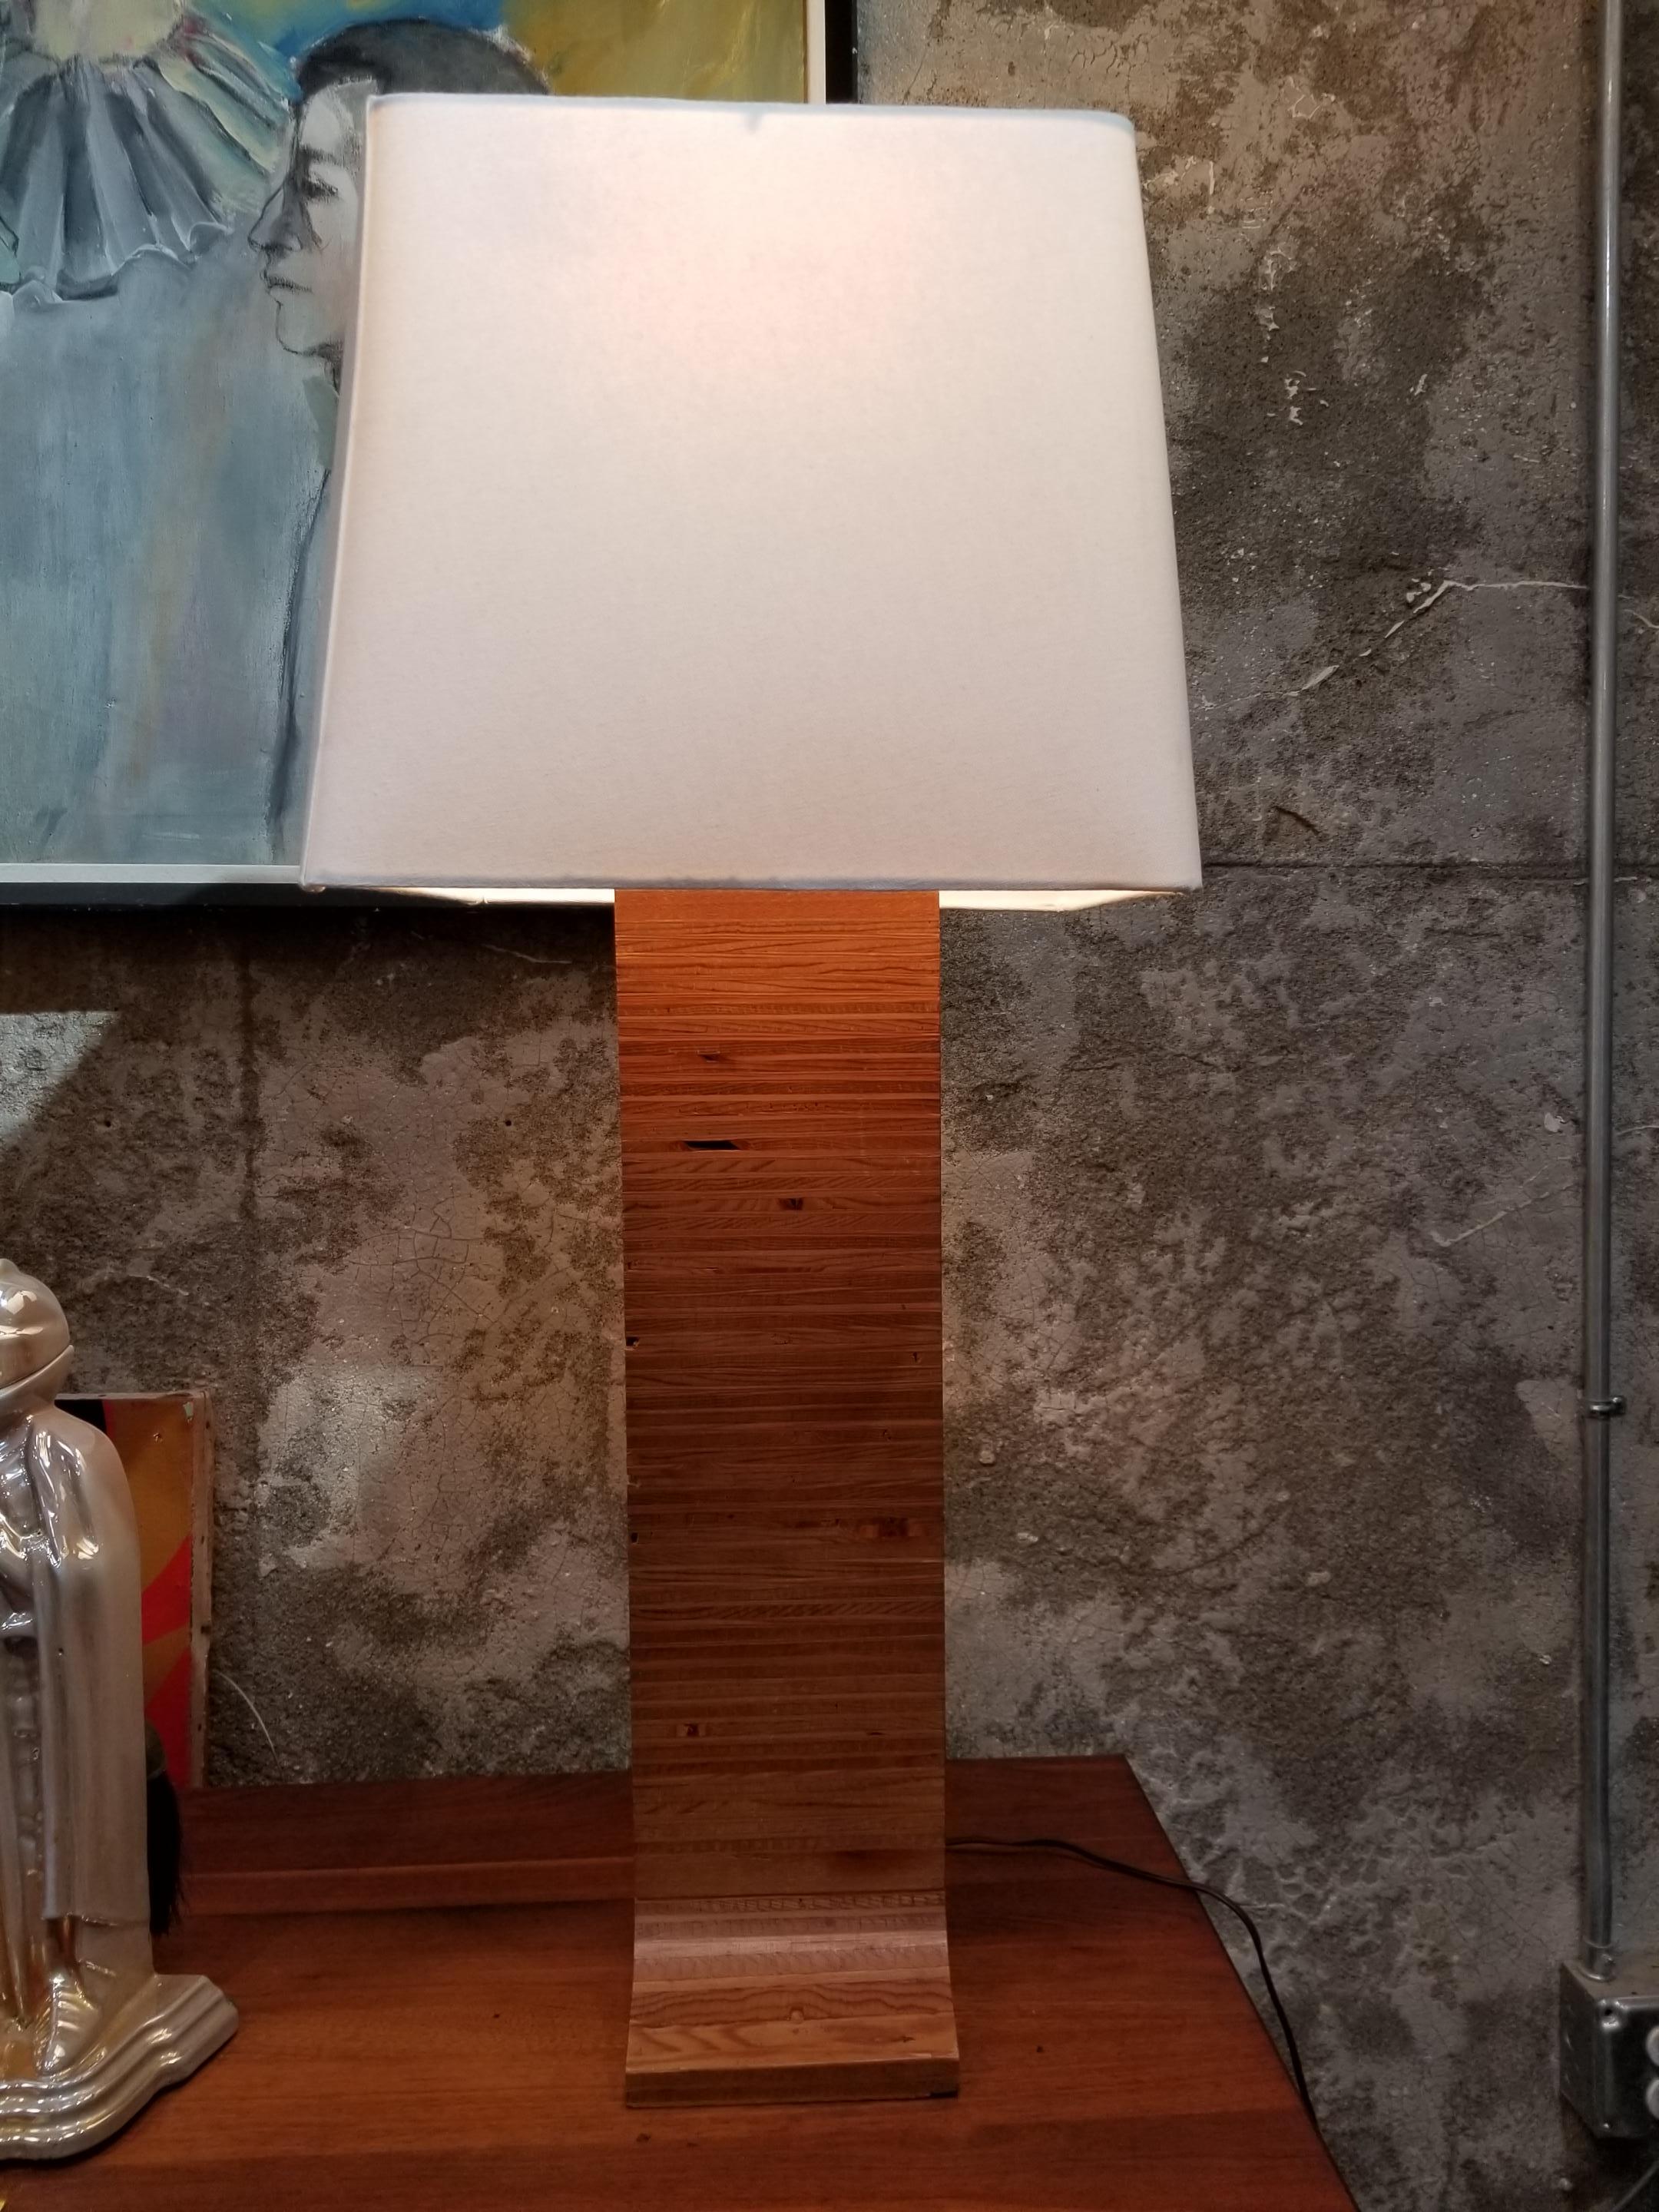 Mid-Century Modern stacked plywood table lamp by Kovacs. Organic modern materials and design with contrasting polished chrome stem and square shade. Retains Underwriters Laboratories / Kovacs paper label on base. Wood base only measures 22